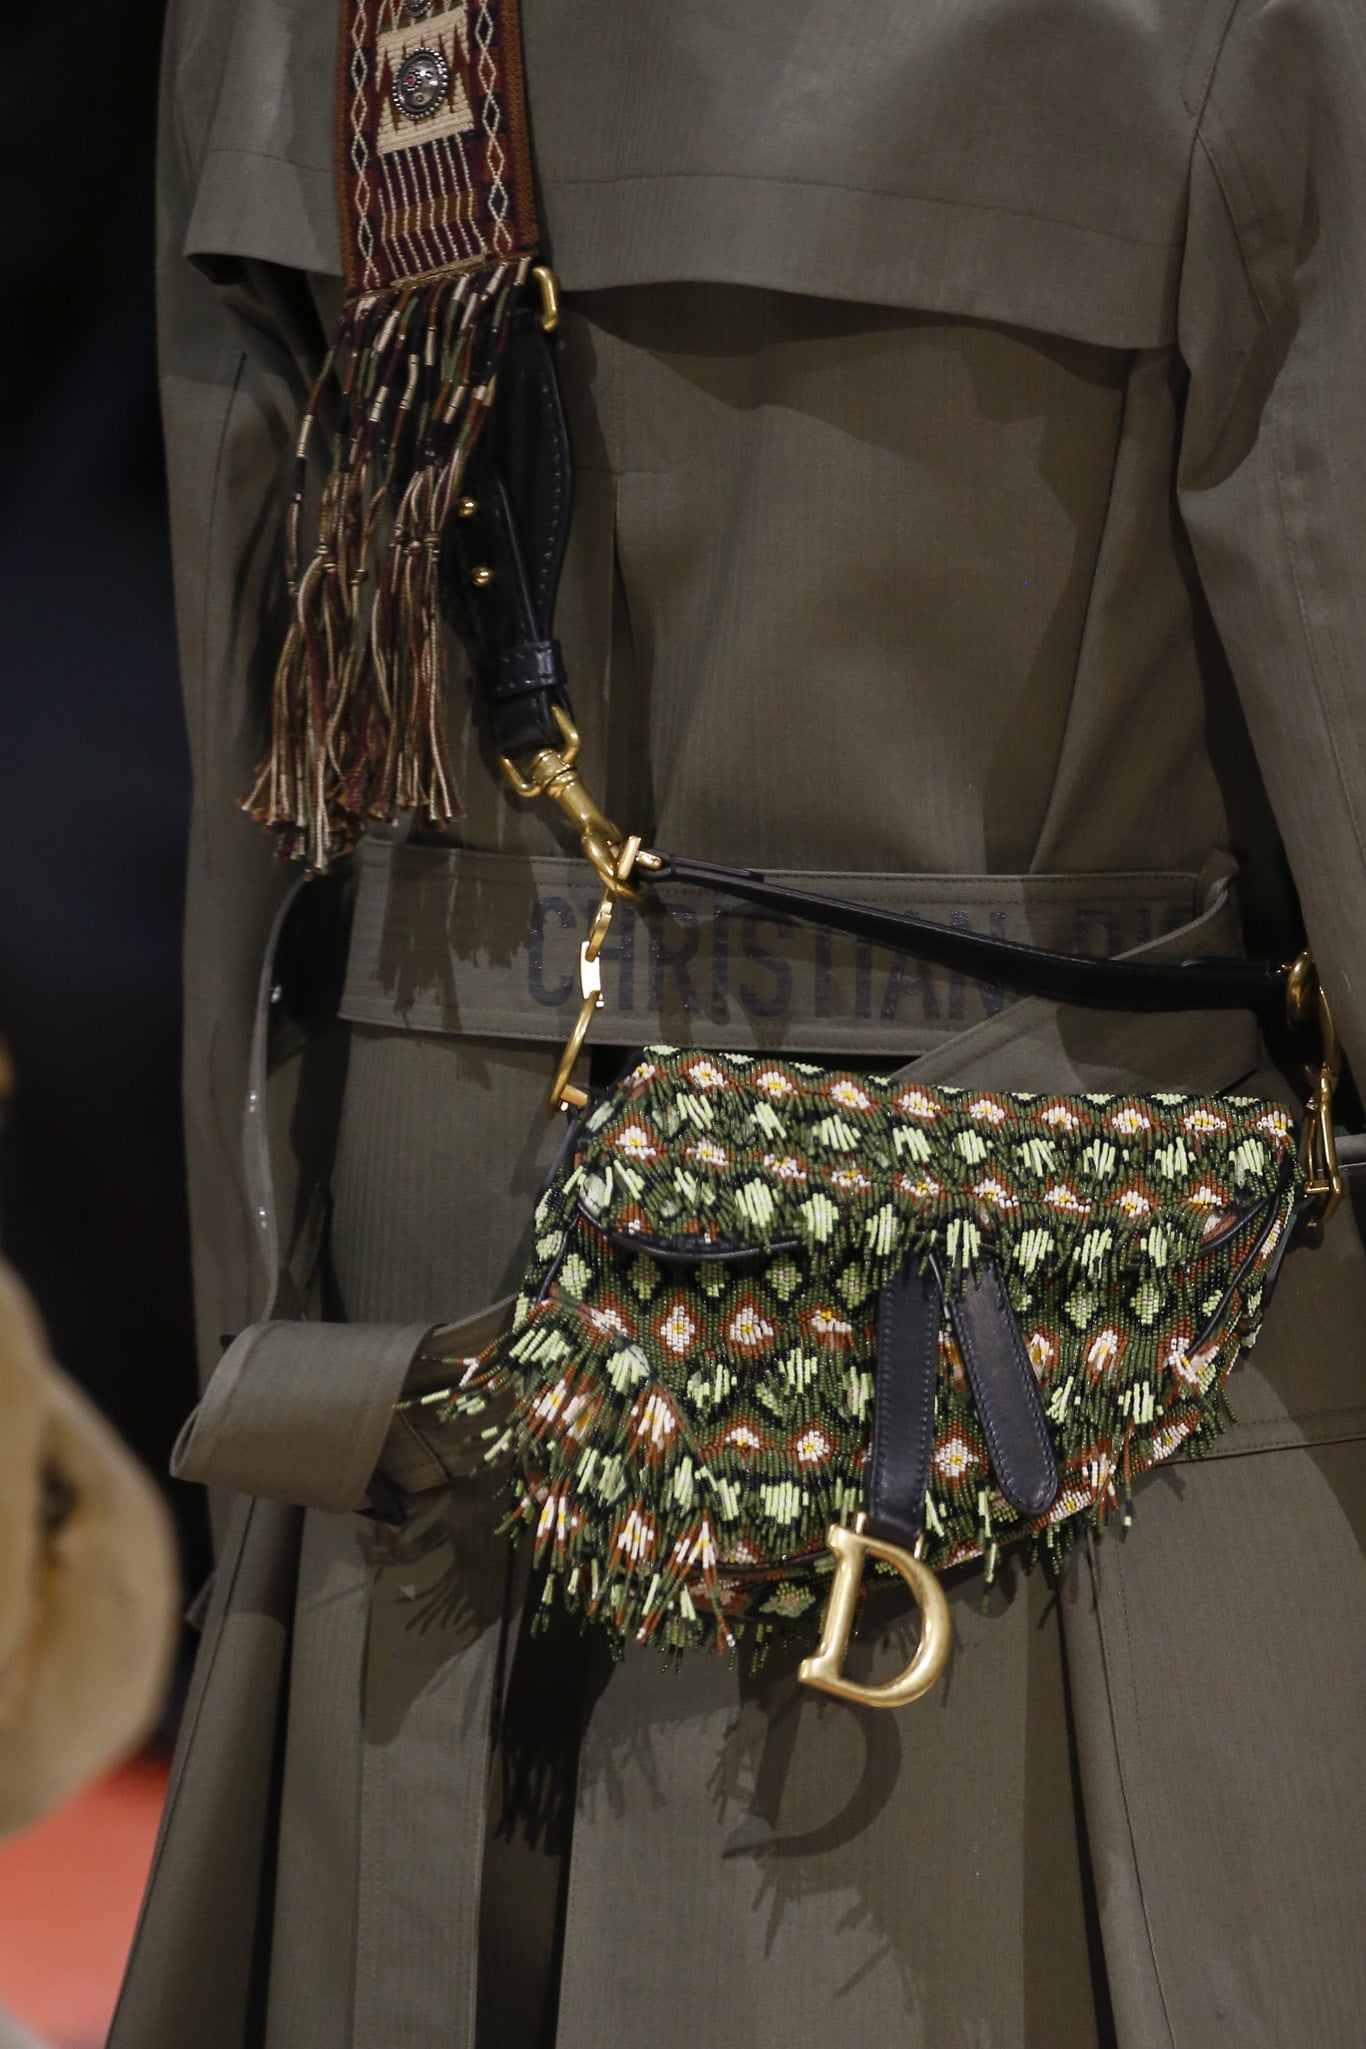 Dior Fall/Winter 2018 Runway Bag Collection featuring Saddle Bags | Spotted Fashion